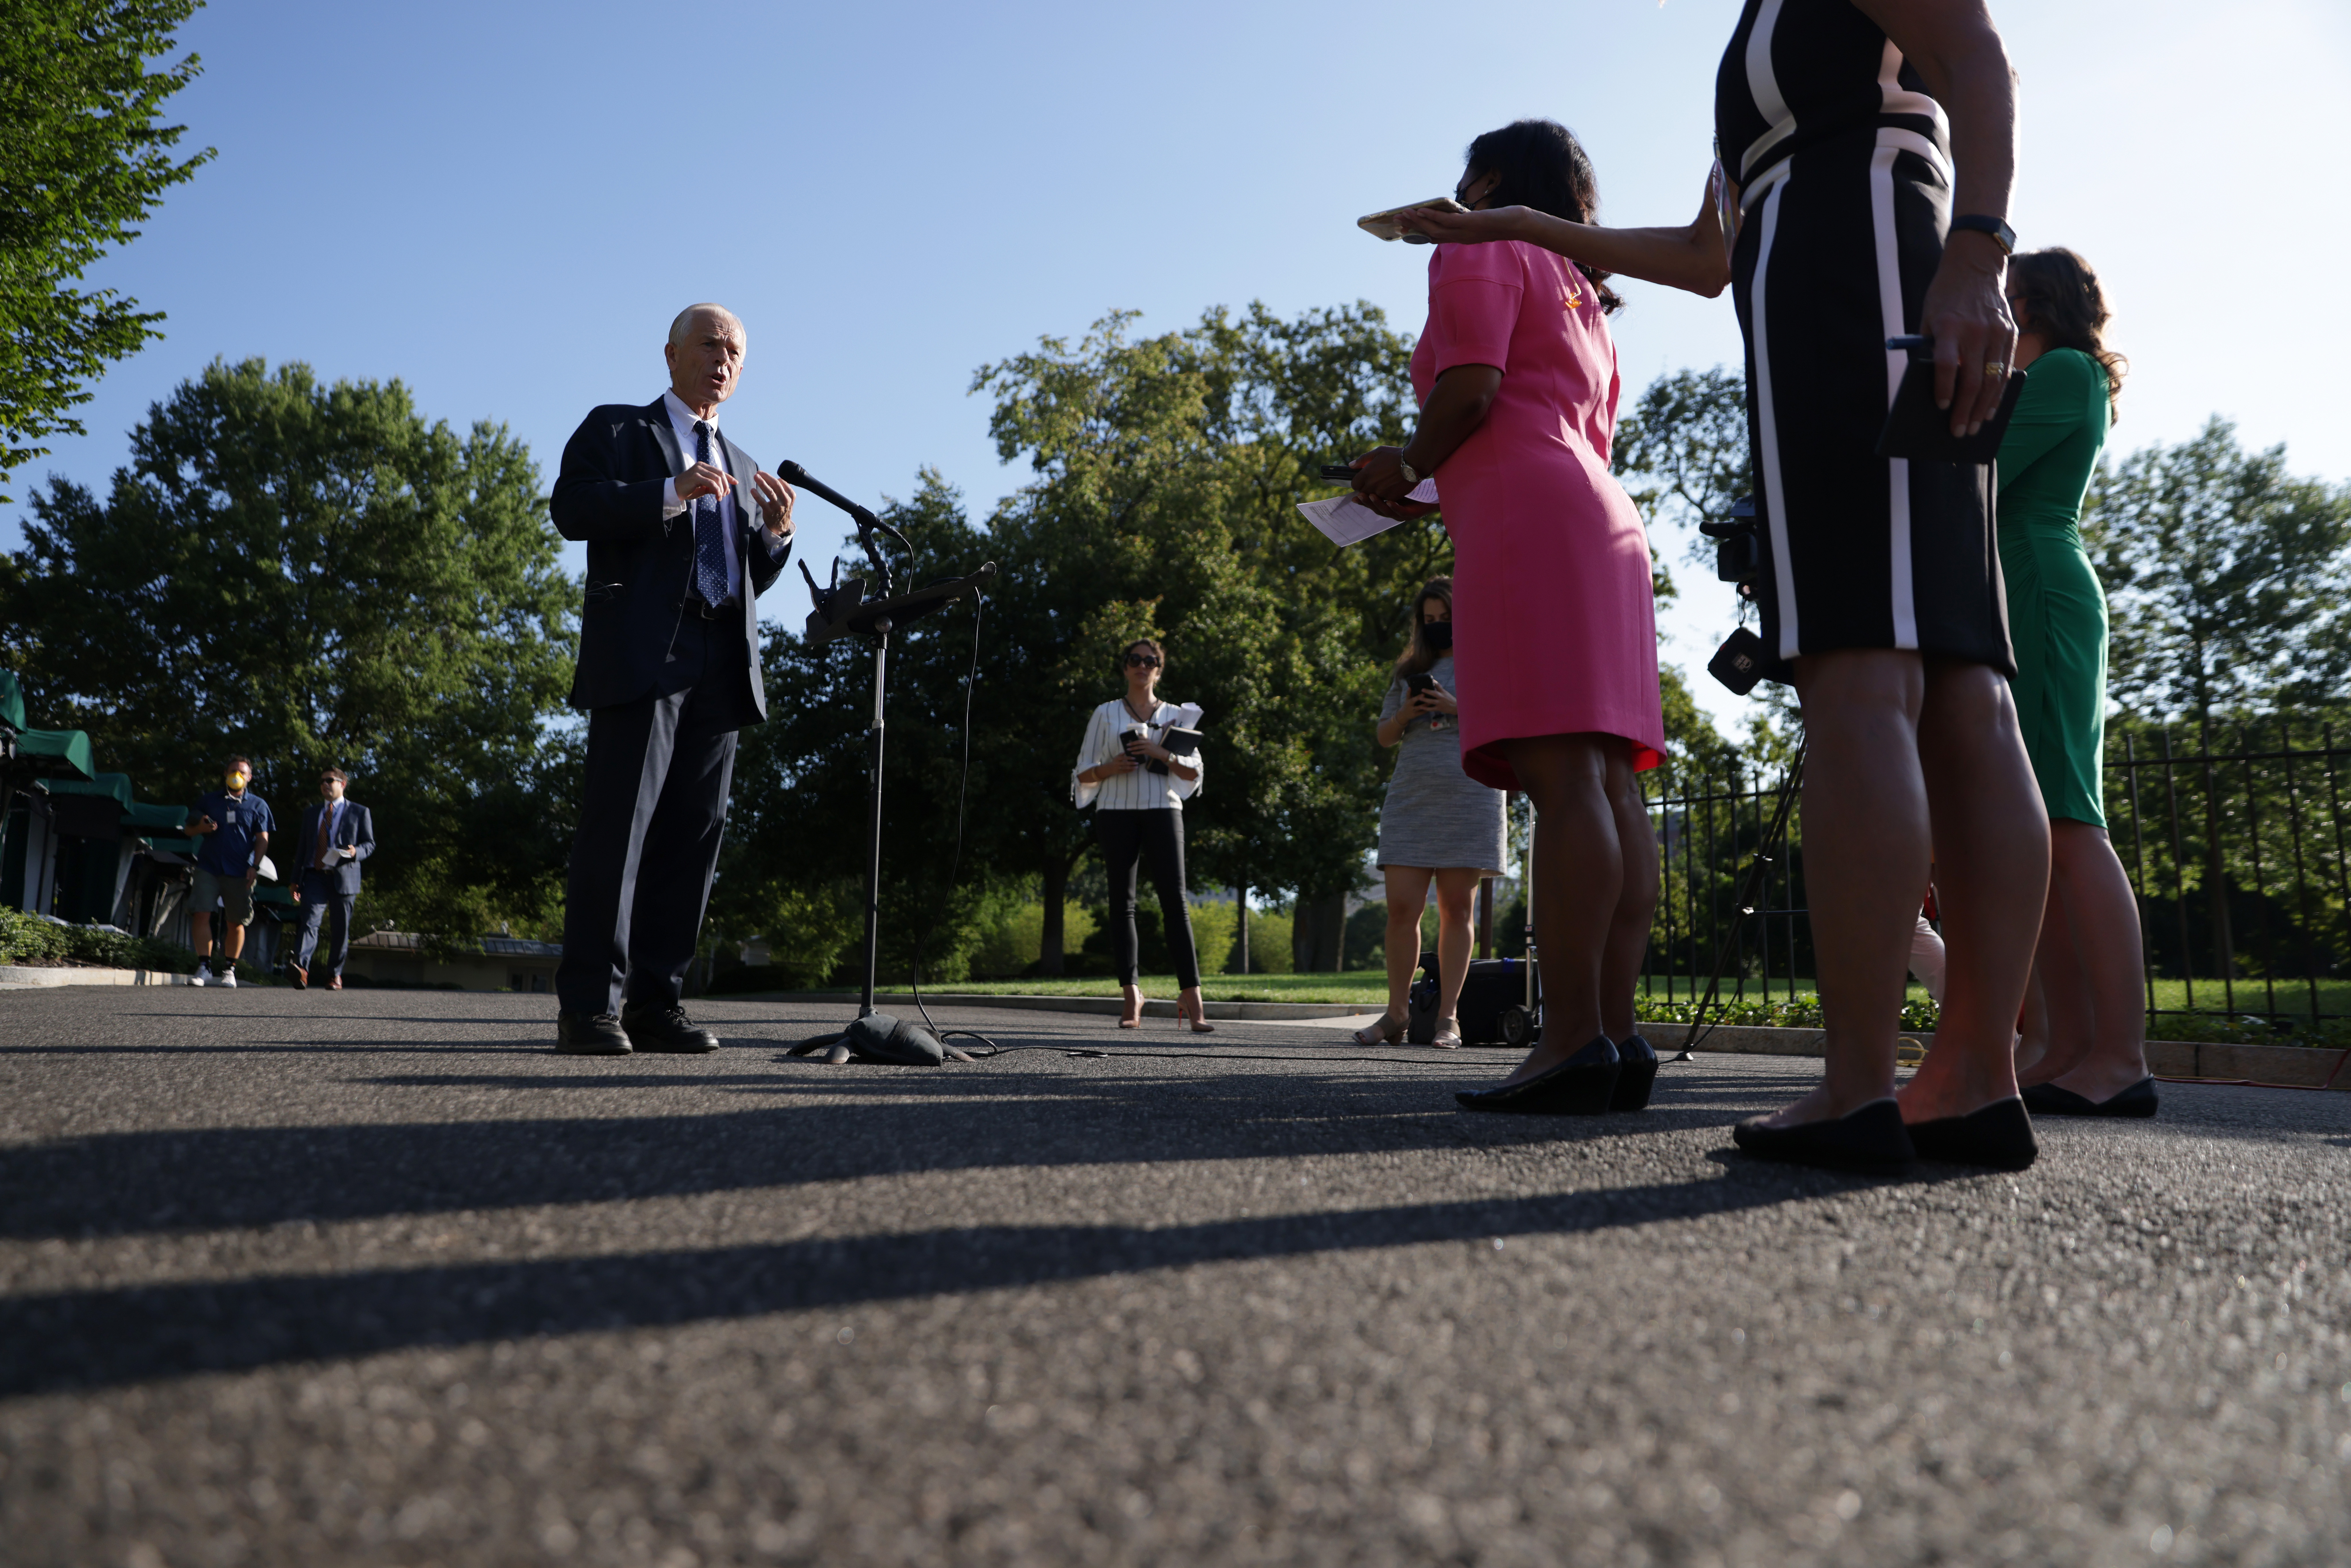 WASHINGTON, DC - JULY 29: White House trade adviser Peter Navarro speaks to members of the press outside the West Wing of the White House July 29, 2020 in Washington, DC. Navarro spoke on various topics including the drug hydroxychloroquine. (Photo by Alex Wong/Getty Images)